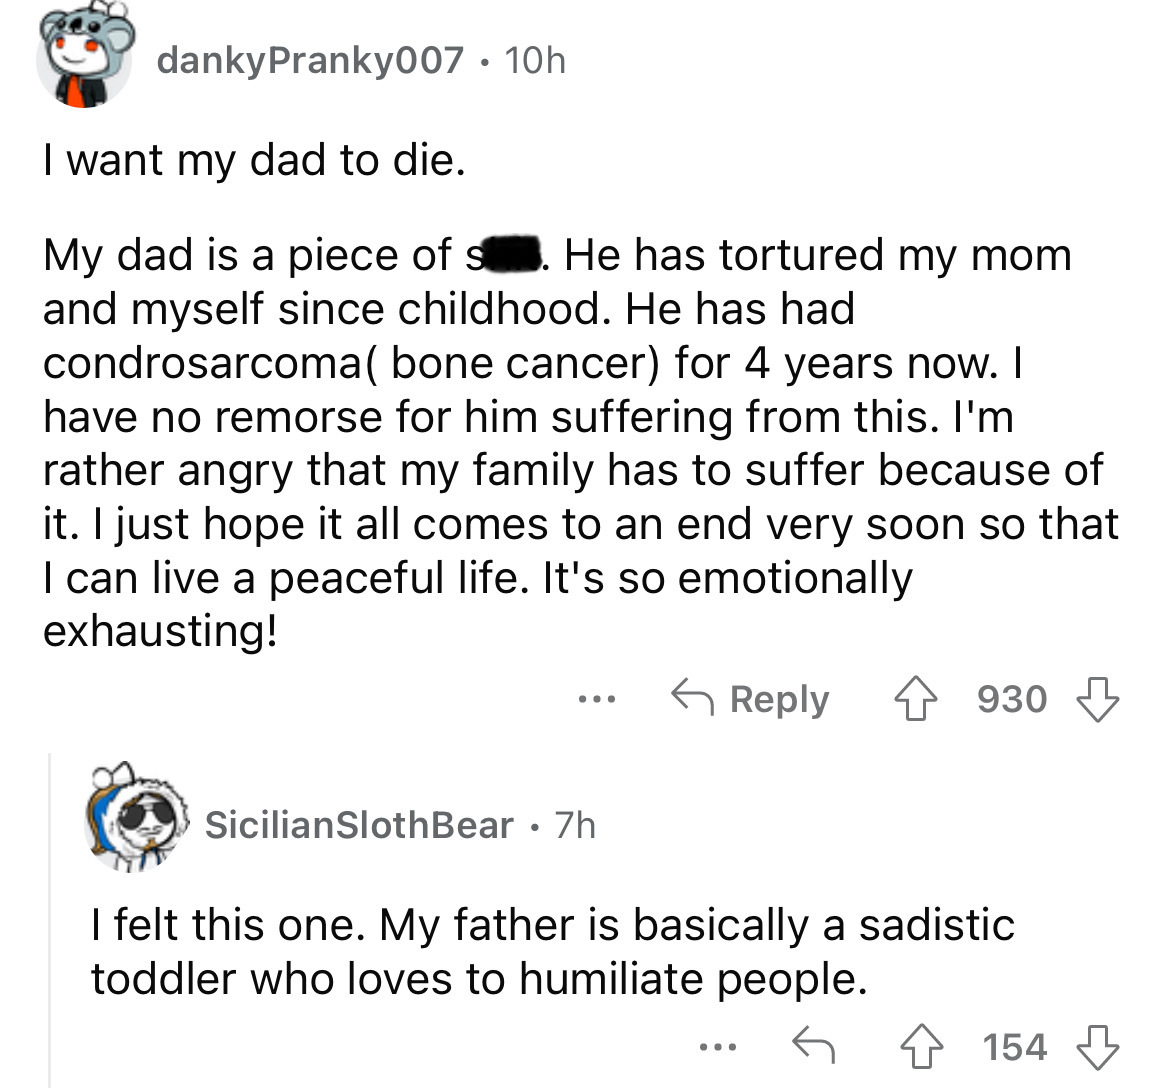 poppy and casteel memes - dankyPranky007 10h I want my dad to die. . My dad is a piece of s. He has tortured my mom and myself since childhood. He has had condrosarcoma bone cancer for 4 years now. I have no remorse for him suffering from this. I'm rather